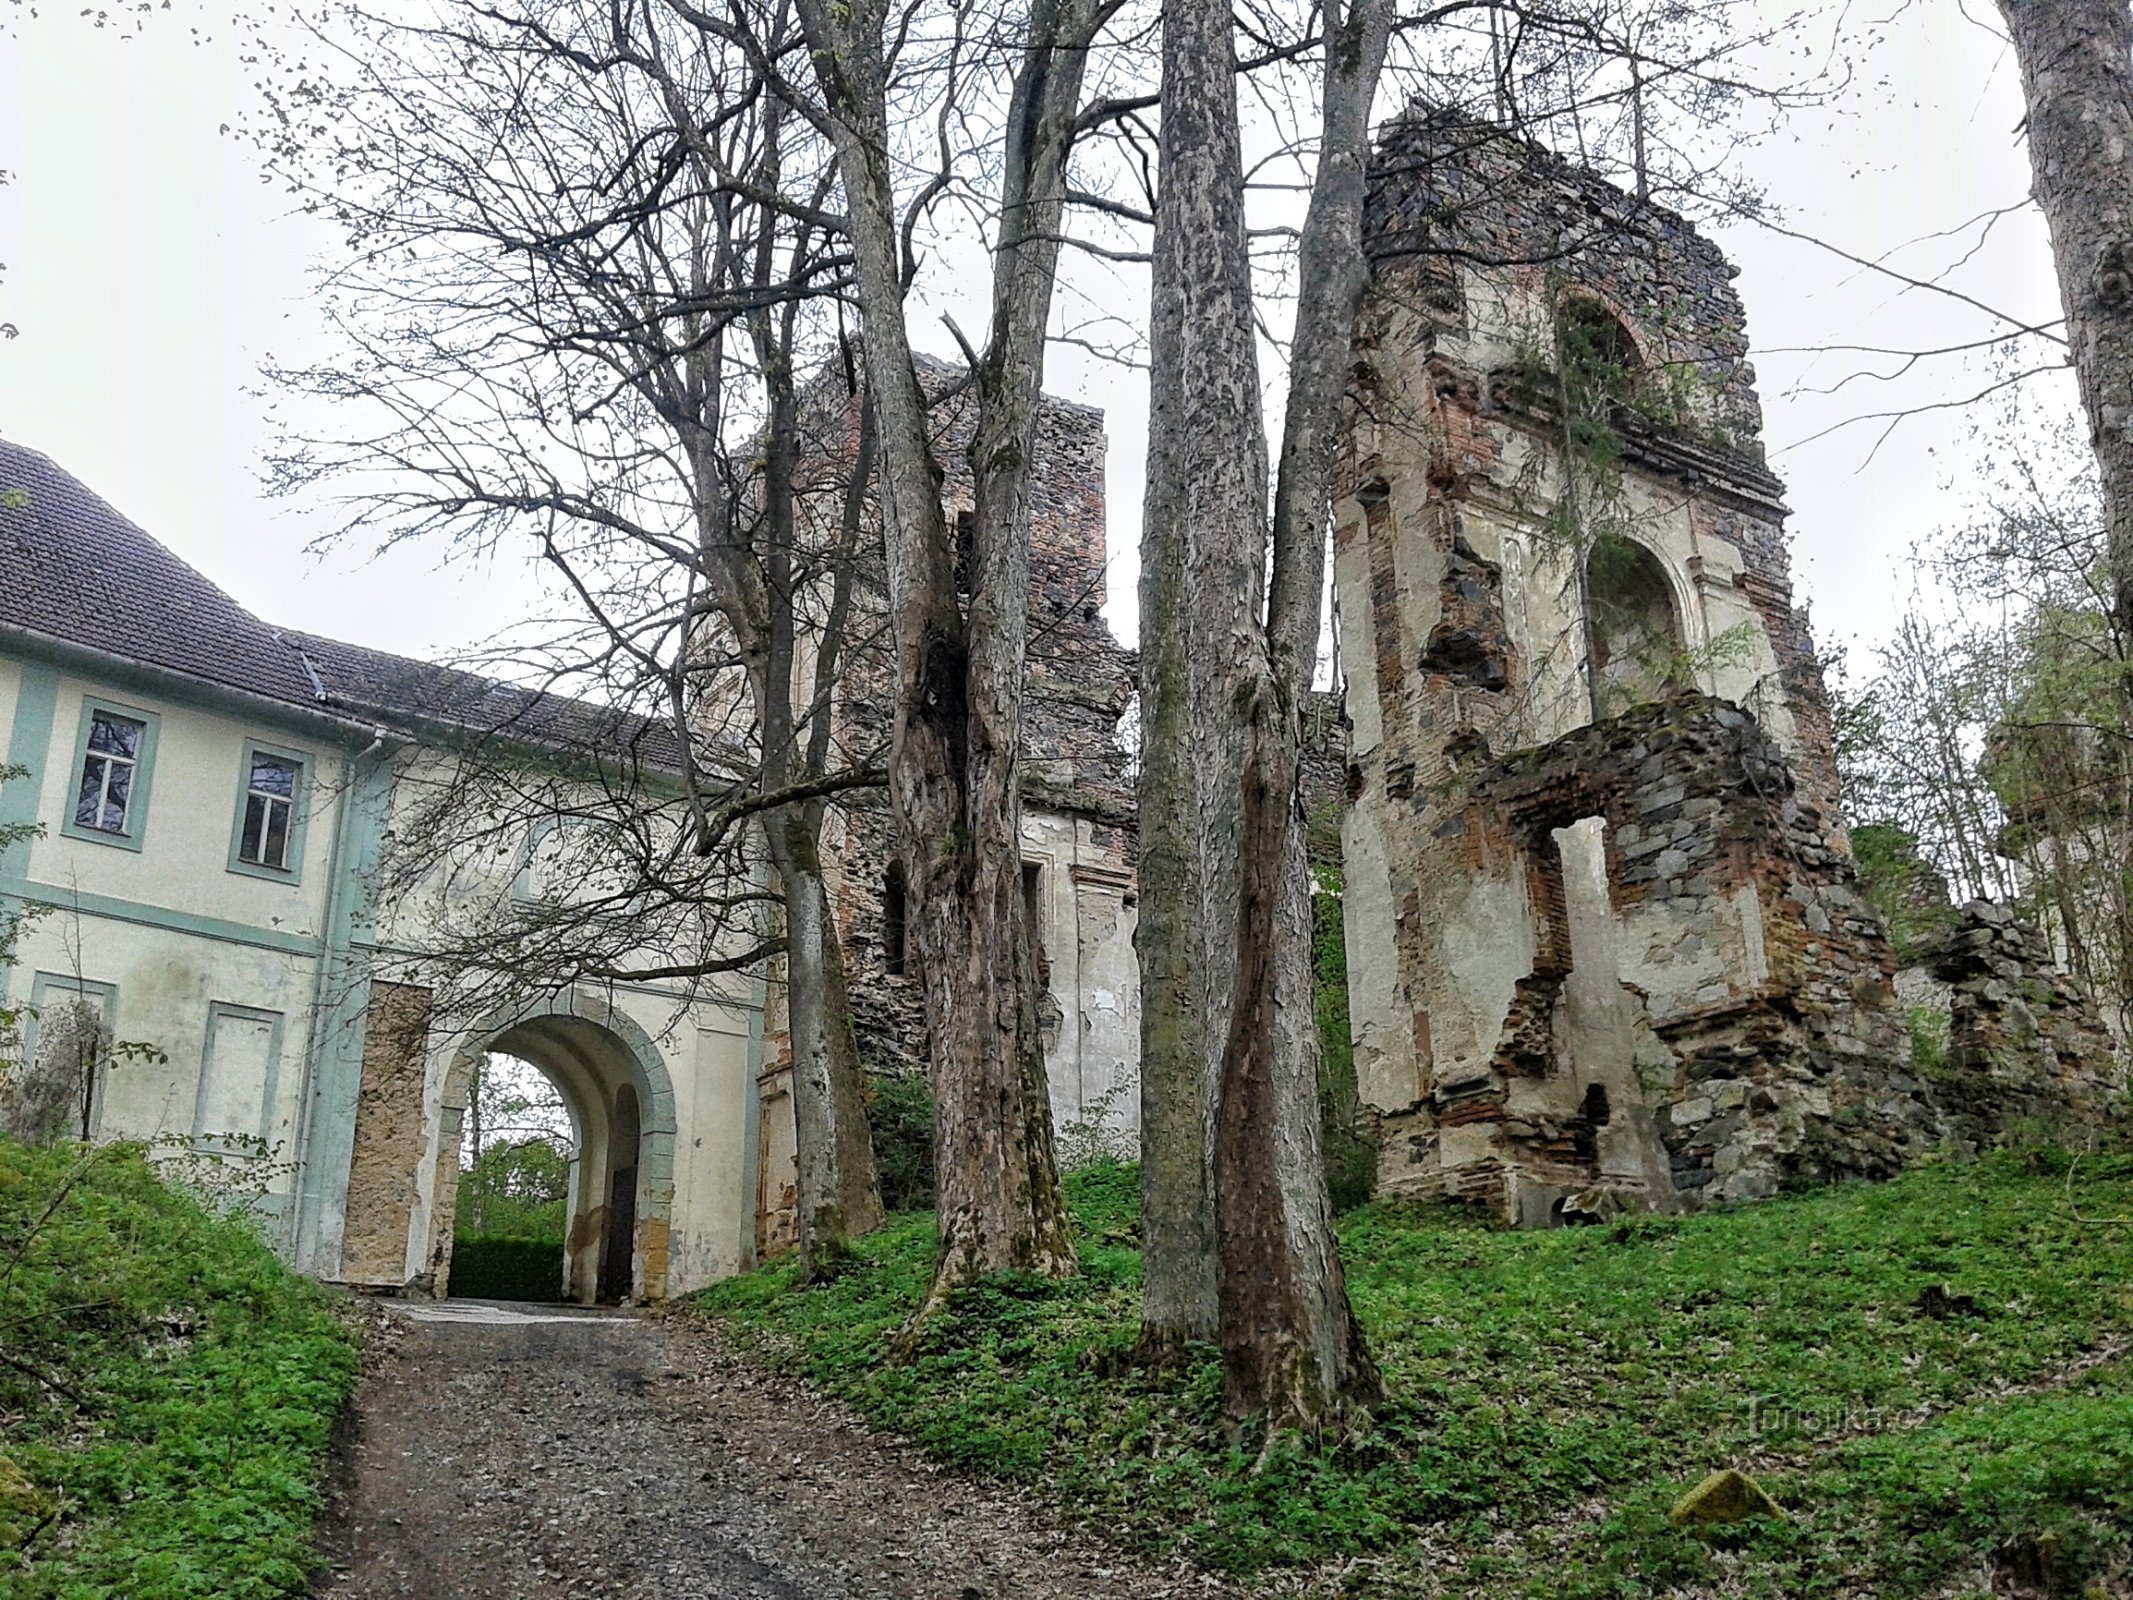 The former monastery and the rest of the castle